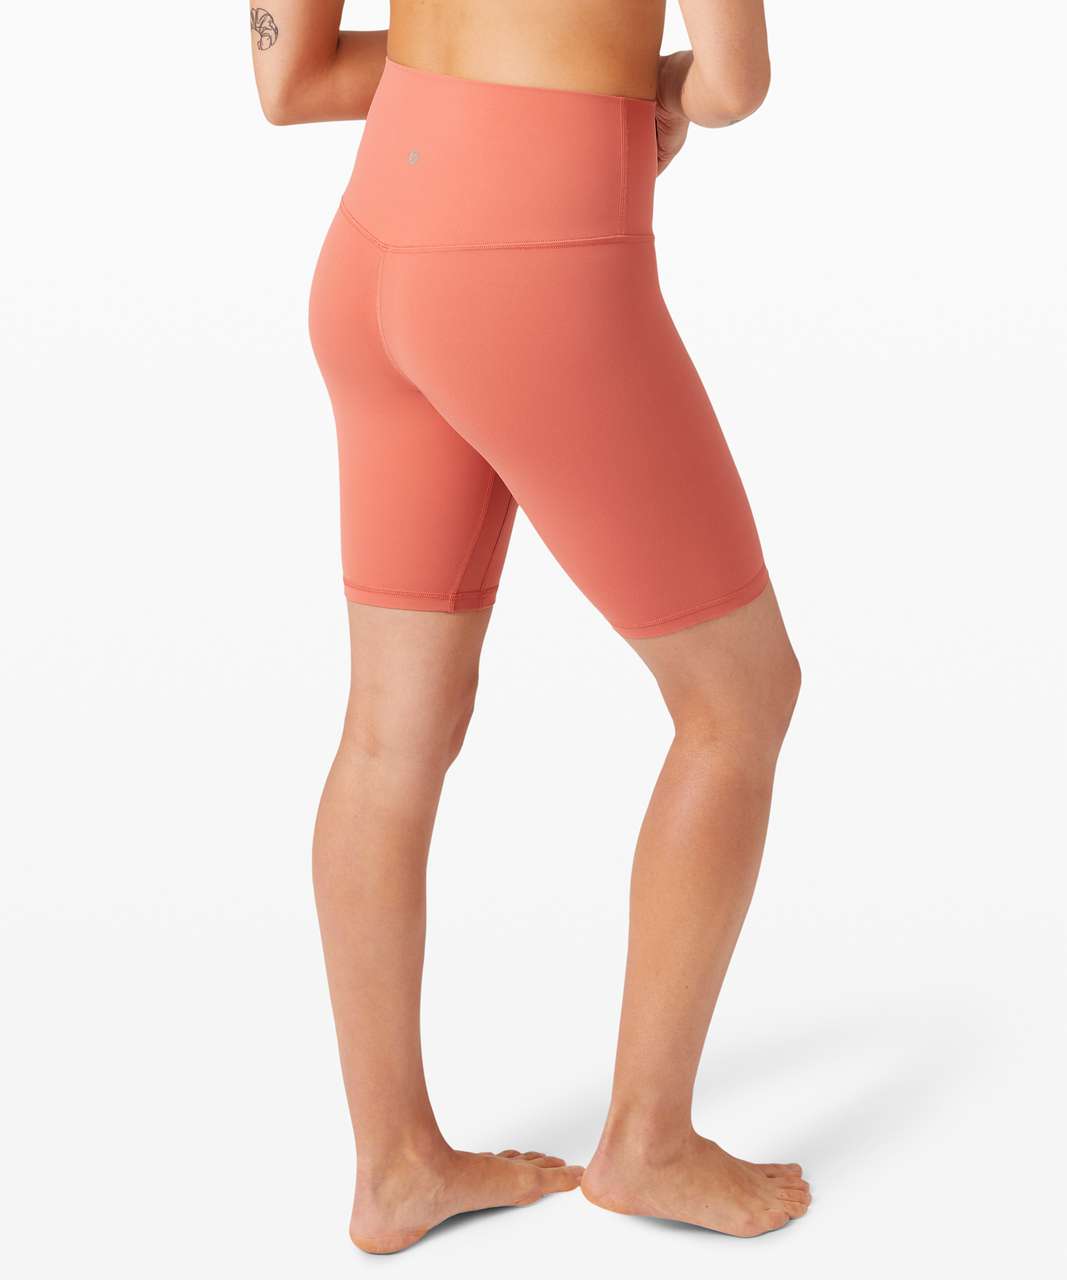 Lululemon Align Tank Rustic Coral size 8 and 10